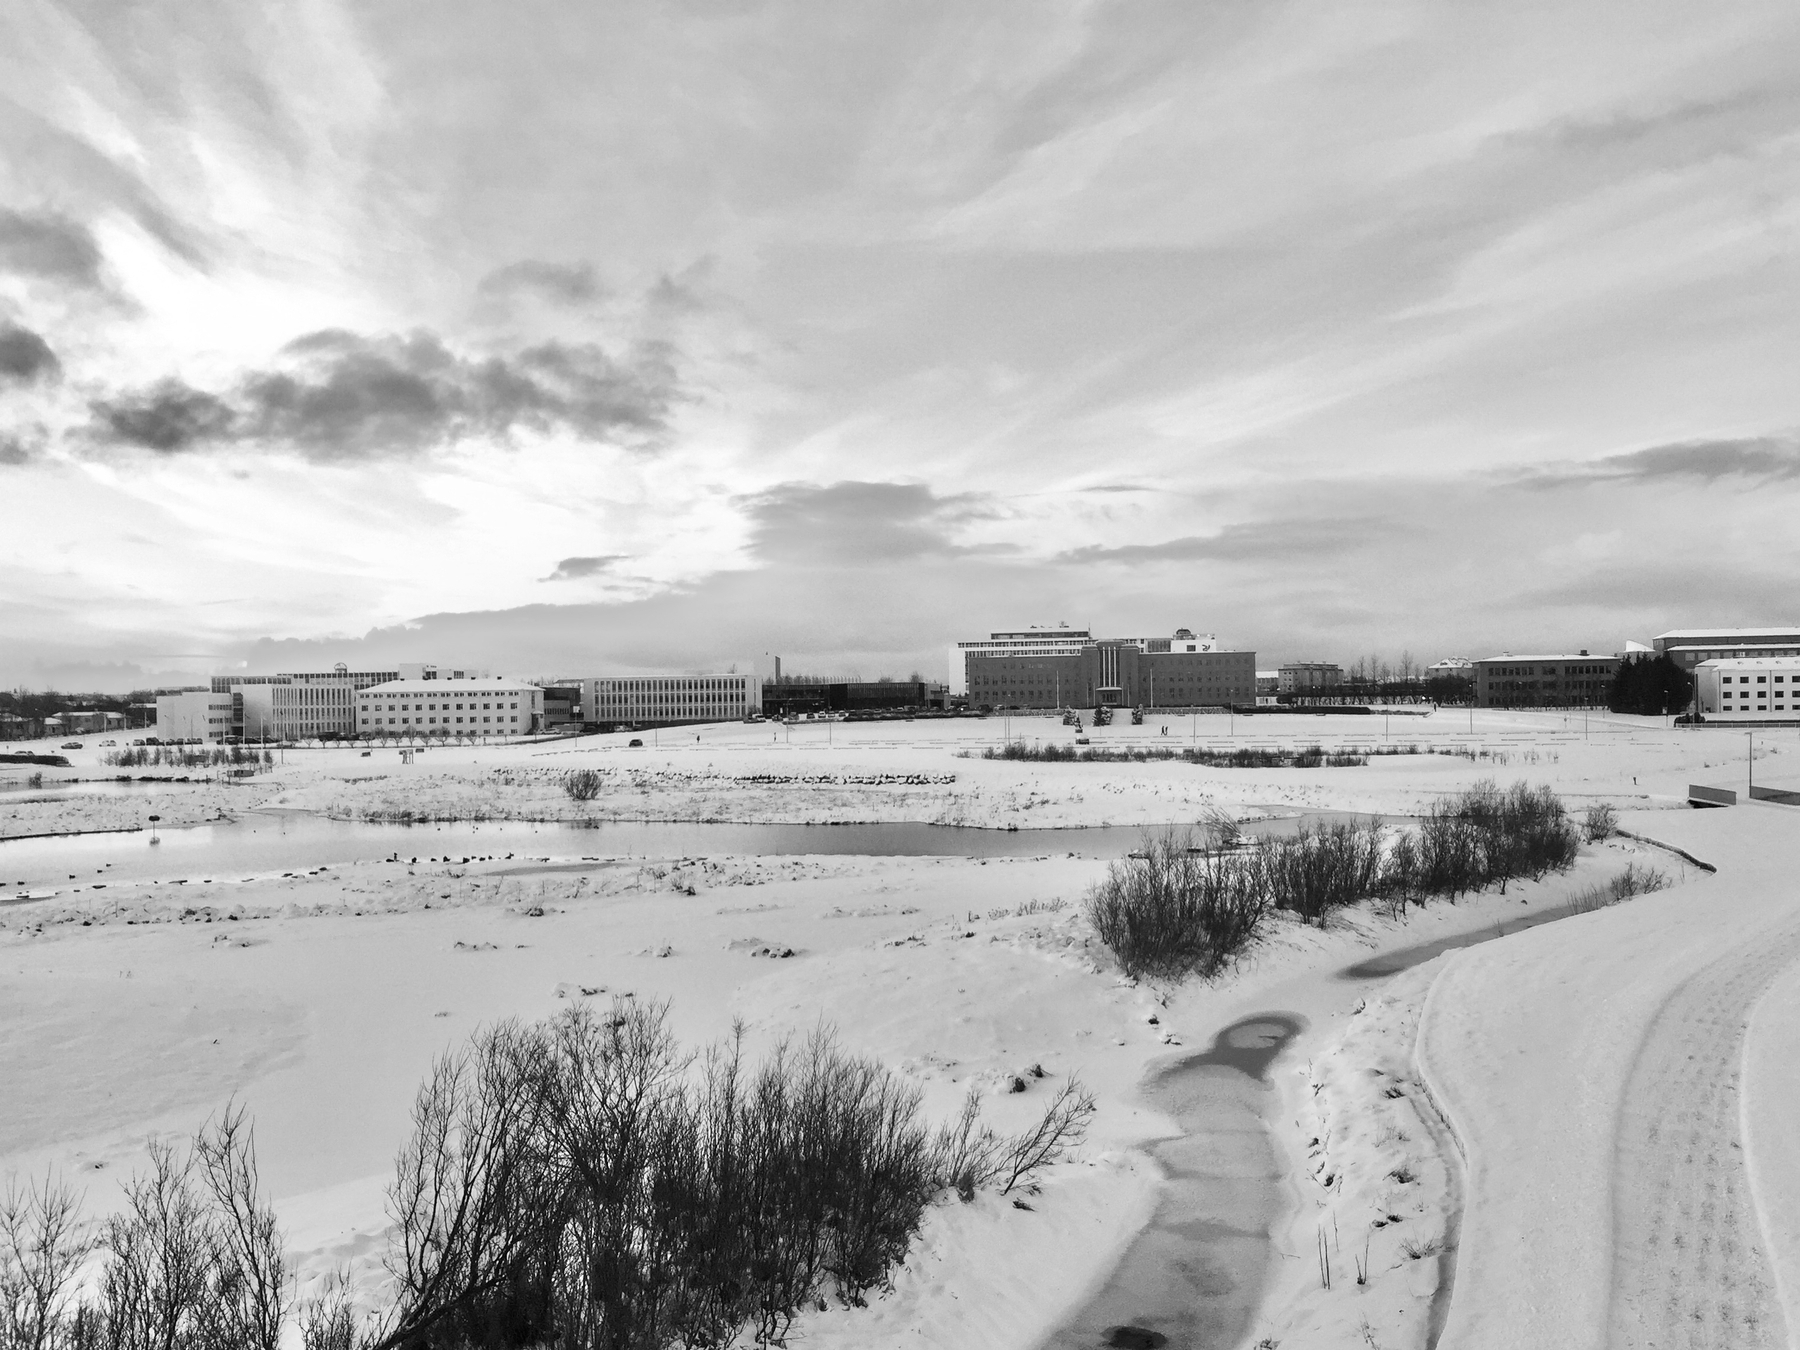 A winter view of the wetlands that’s next to Reykjavík airport.